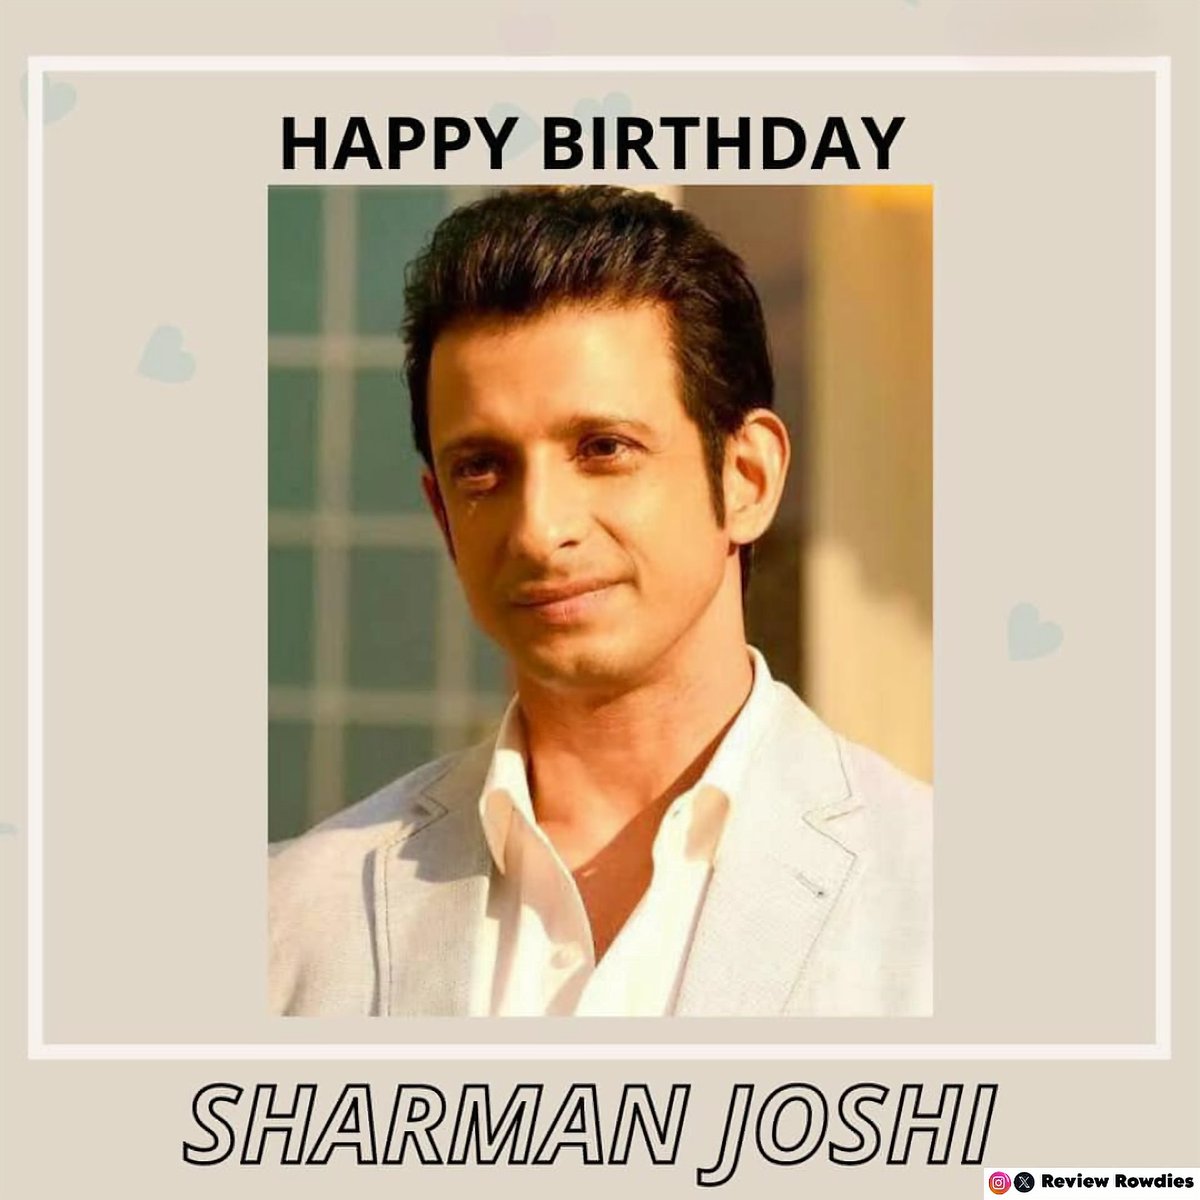 Wishing a very happy birthday to @TheSharmanJoshi 

#SharmanJoshi #HappyBirthdaySharmanJoshi #HBDSharmanJoshi #Reviewrowdies